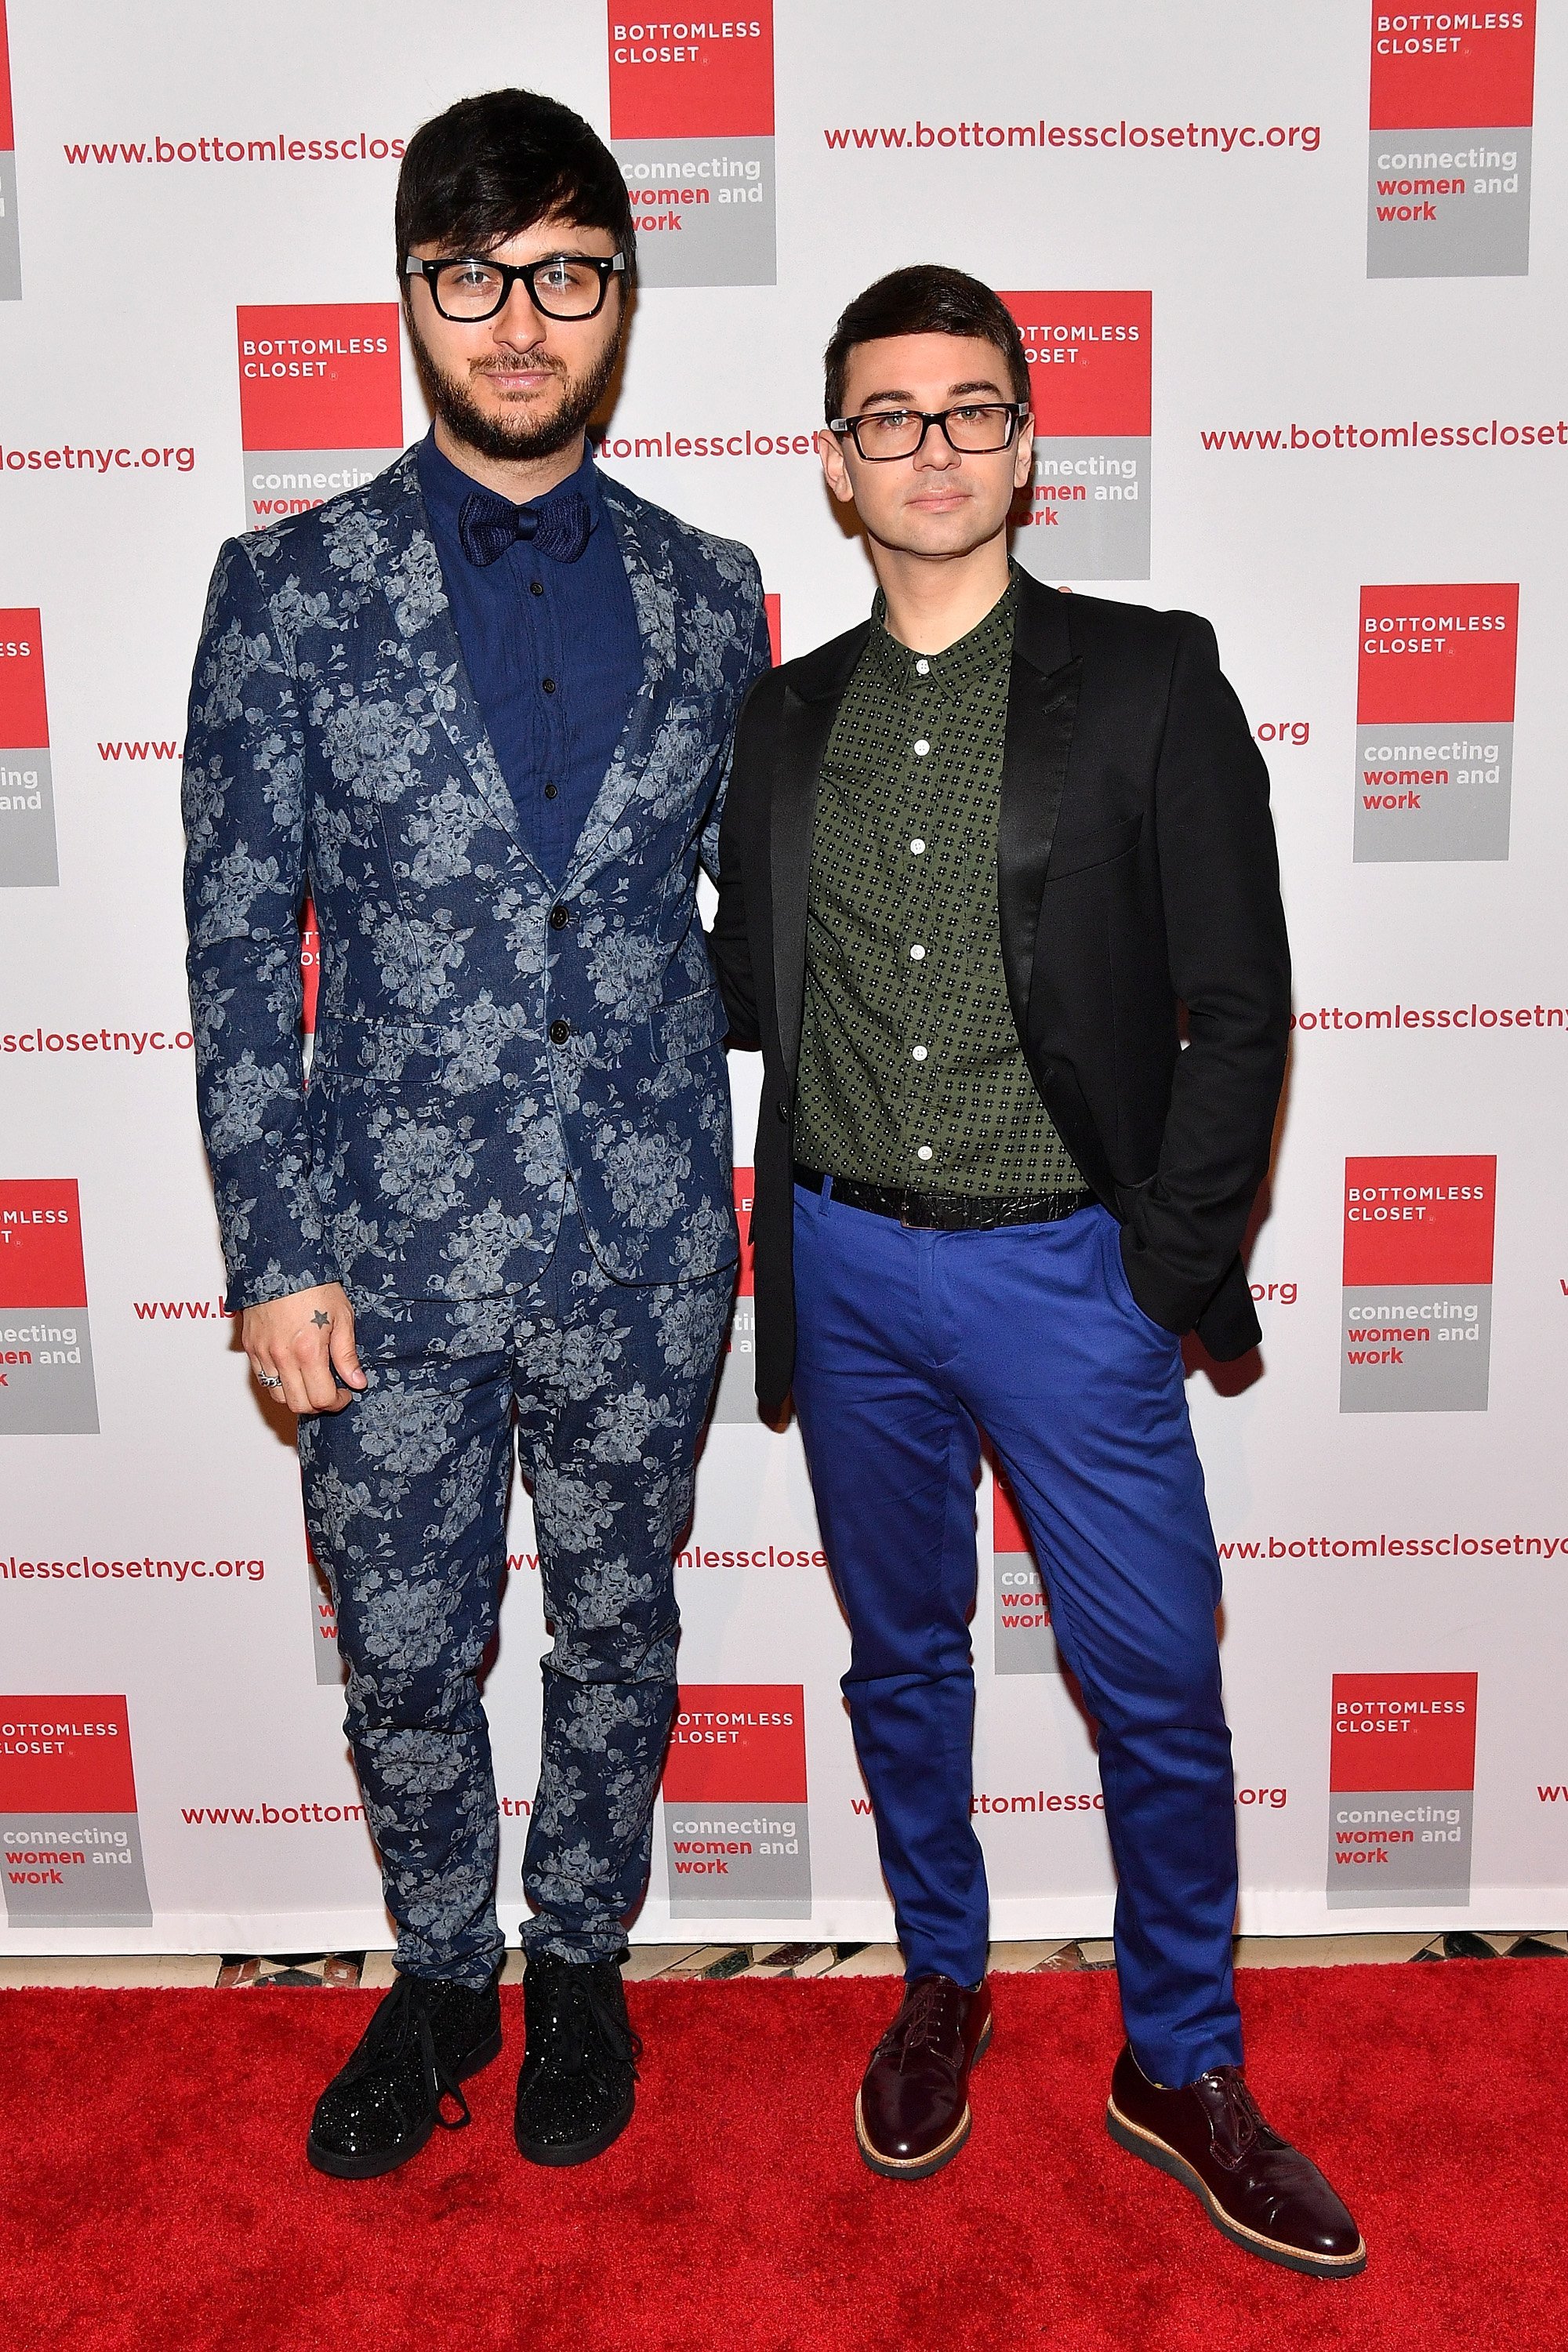 Brad Walsh and Christian Siriano attend the Bottomless Closet's 19th Annual Spring Luncheon on May 16, 2018, in New York City. | Source: Getty Images.